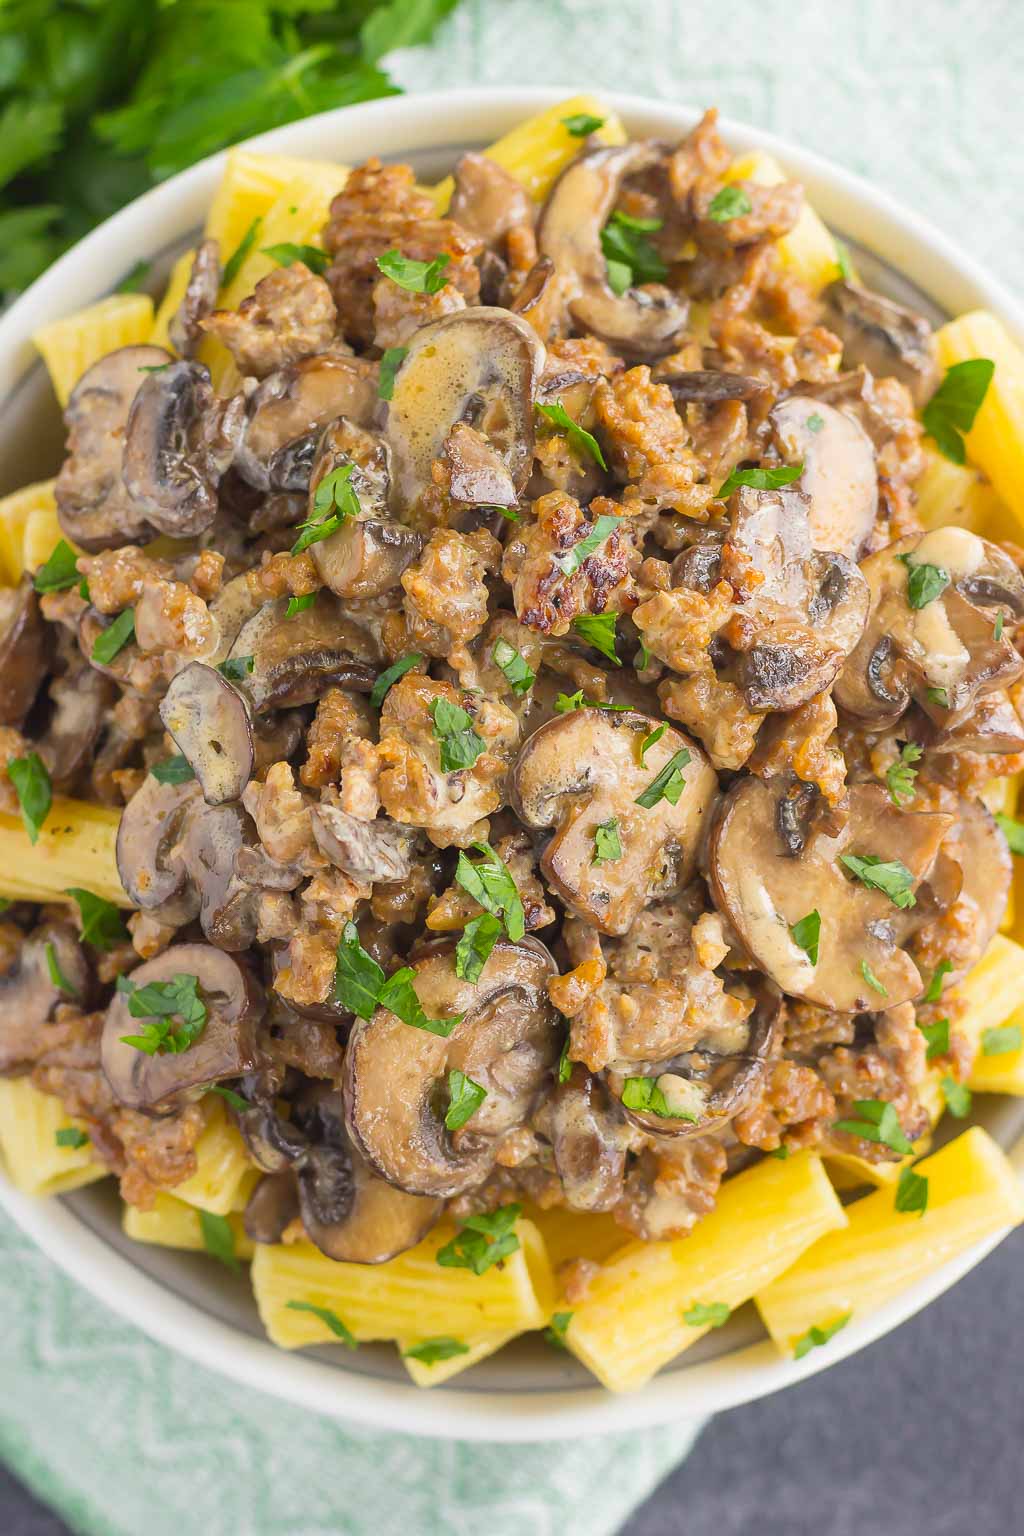 This Creamy Sausage and Mushroom Rigatoni is the perfect comfort dish that's ready in just 30 minutes. Zesty sausage, fresh mushrooms and rigatoni pasta are tossed in flavorful cream sauce. Hearty, comforting, and all-around delicious, this meal-time favorite is sure to be a winner all year long!